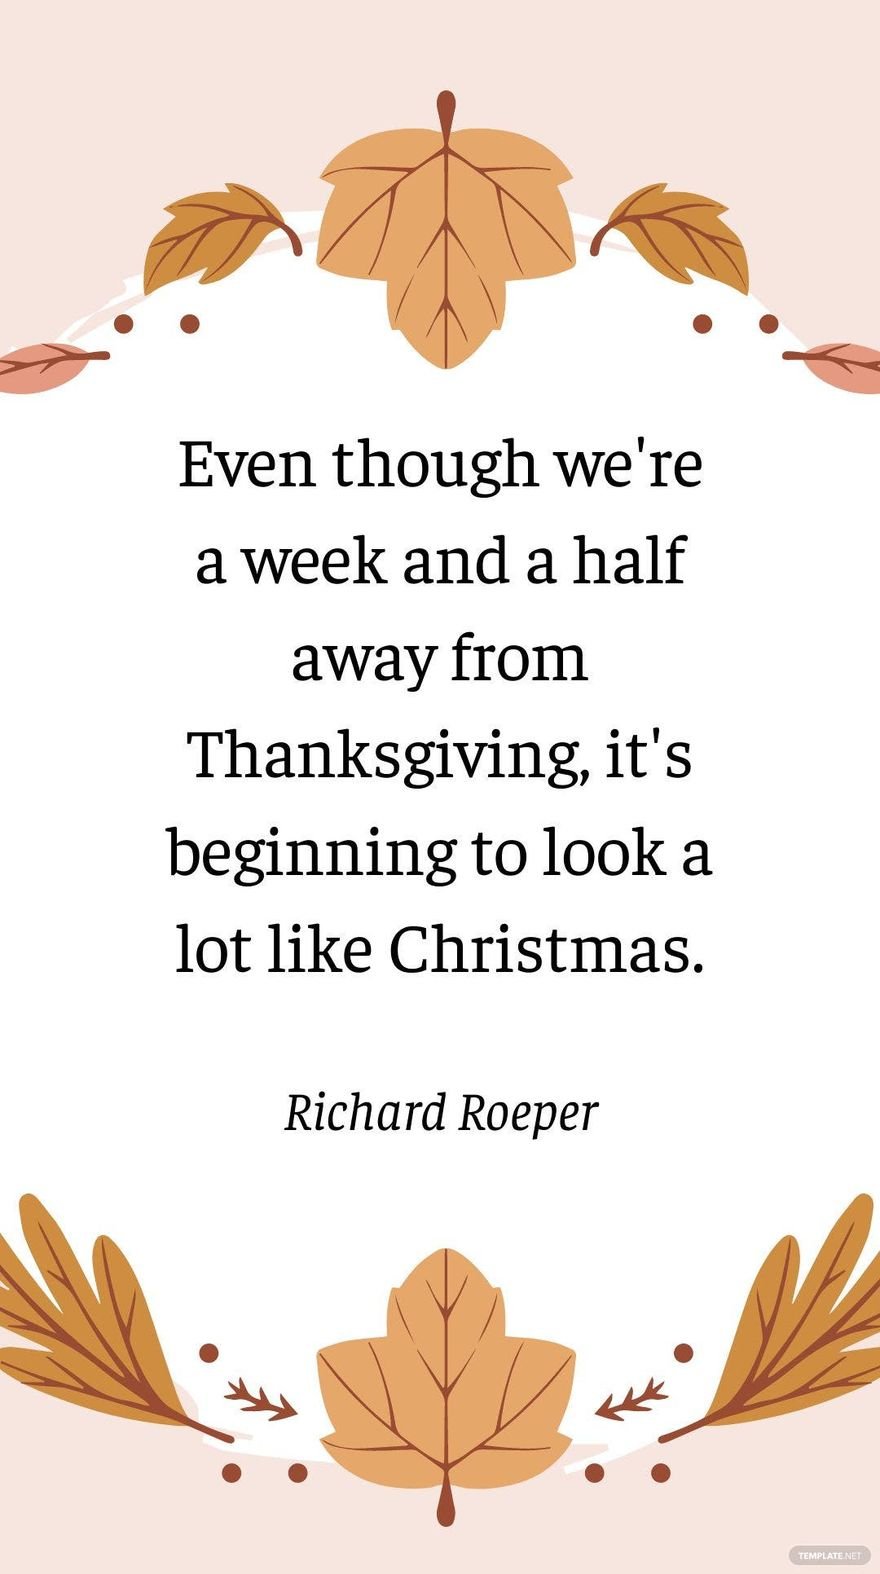 Richard Roeper - Even though we're a week and a half away from Thanksgiving, it's beginning to look a lot like Christmas. in JPG